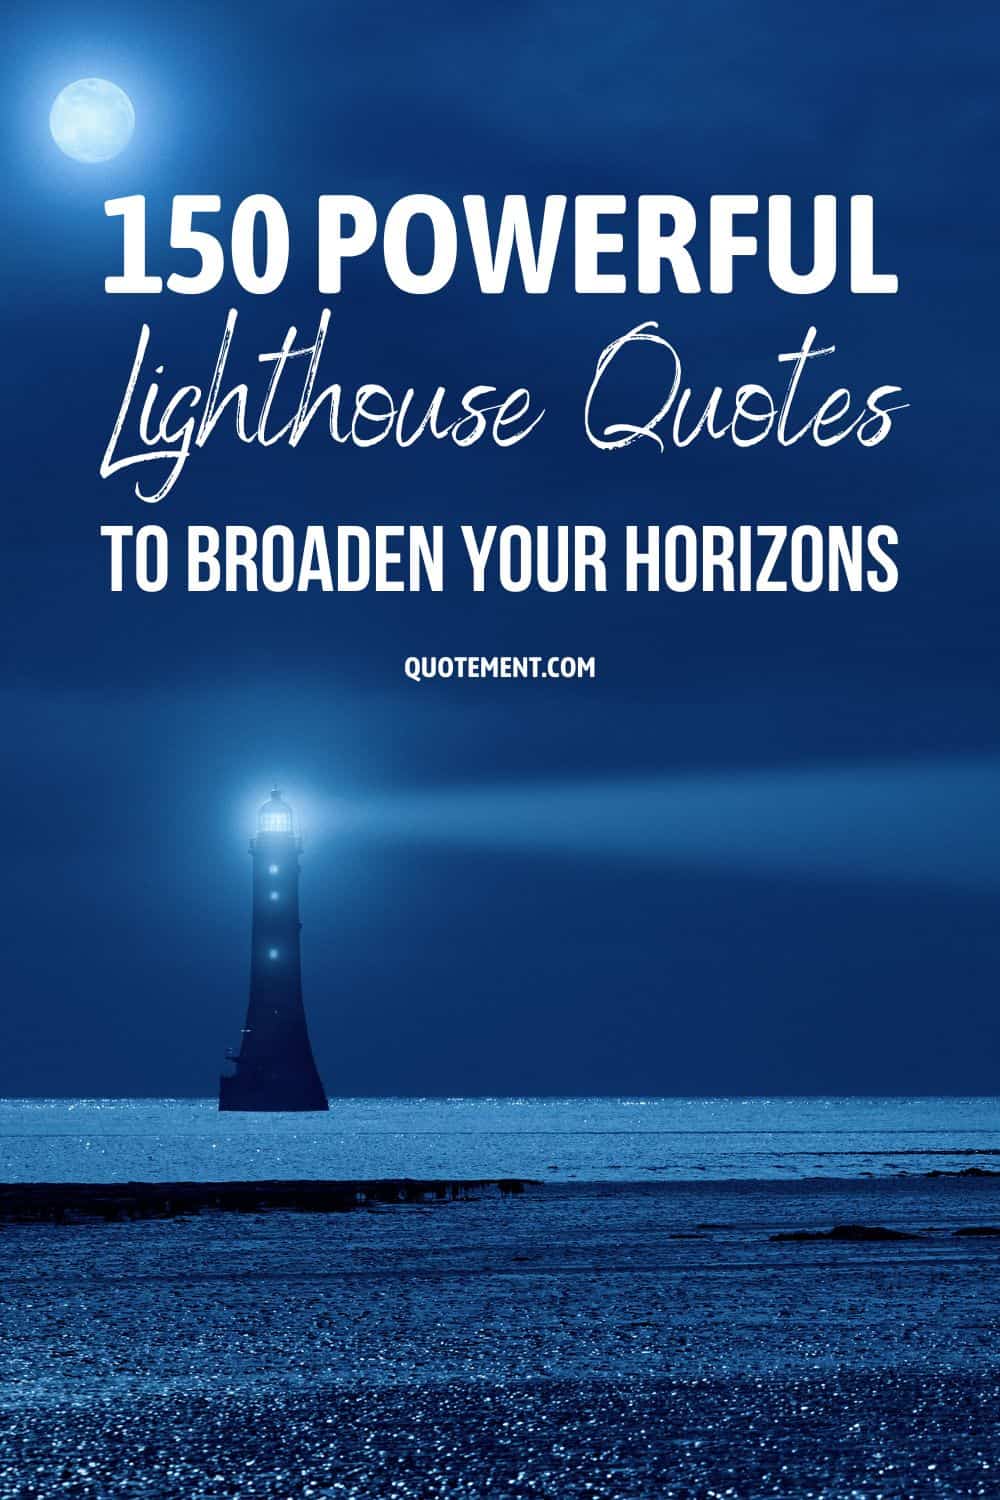 150 Powerful Lighthouse Quotes To Broaden Your Horizons
